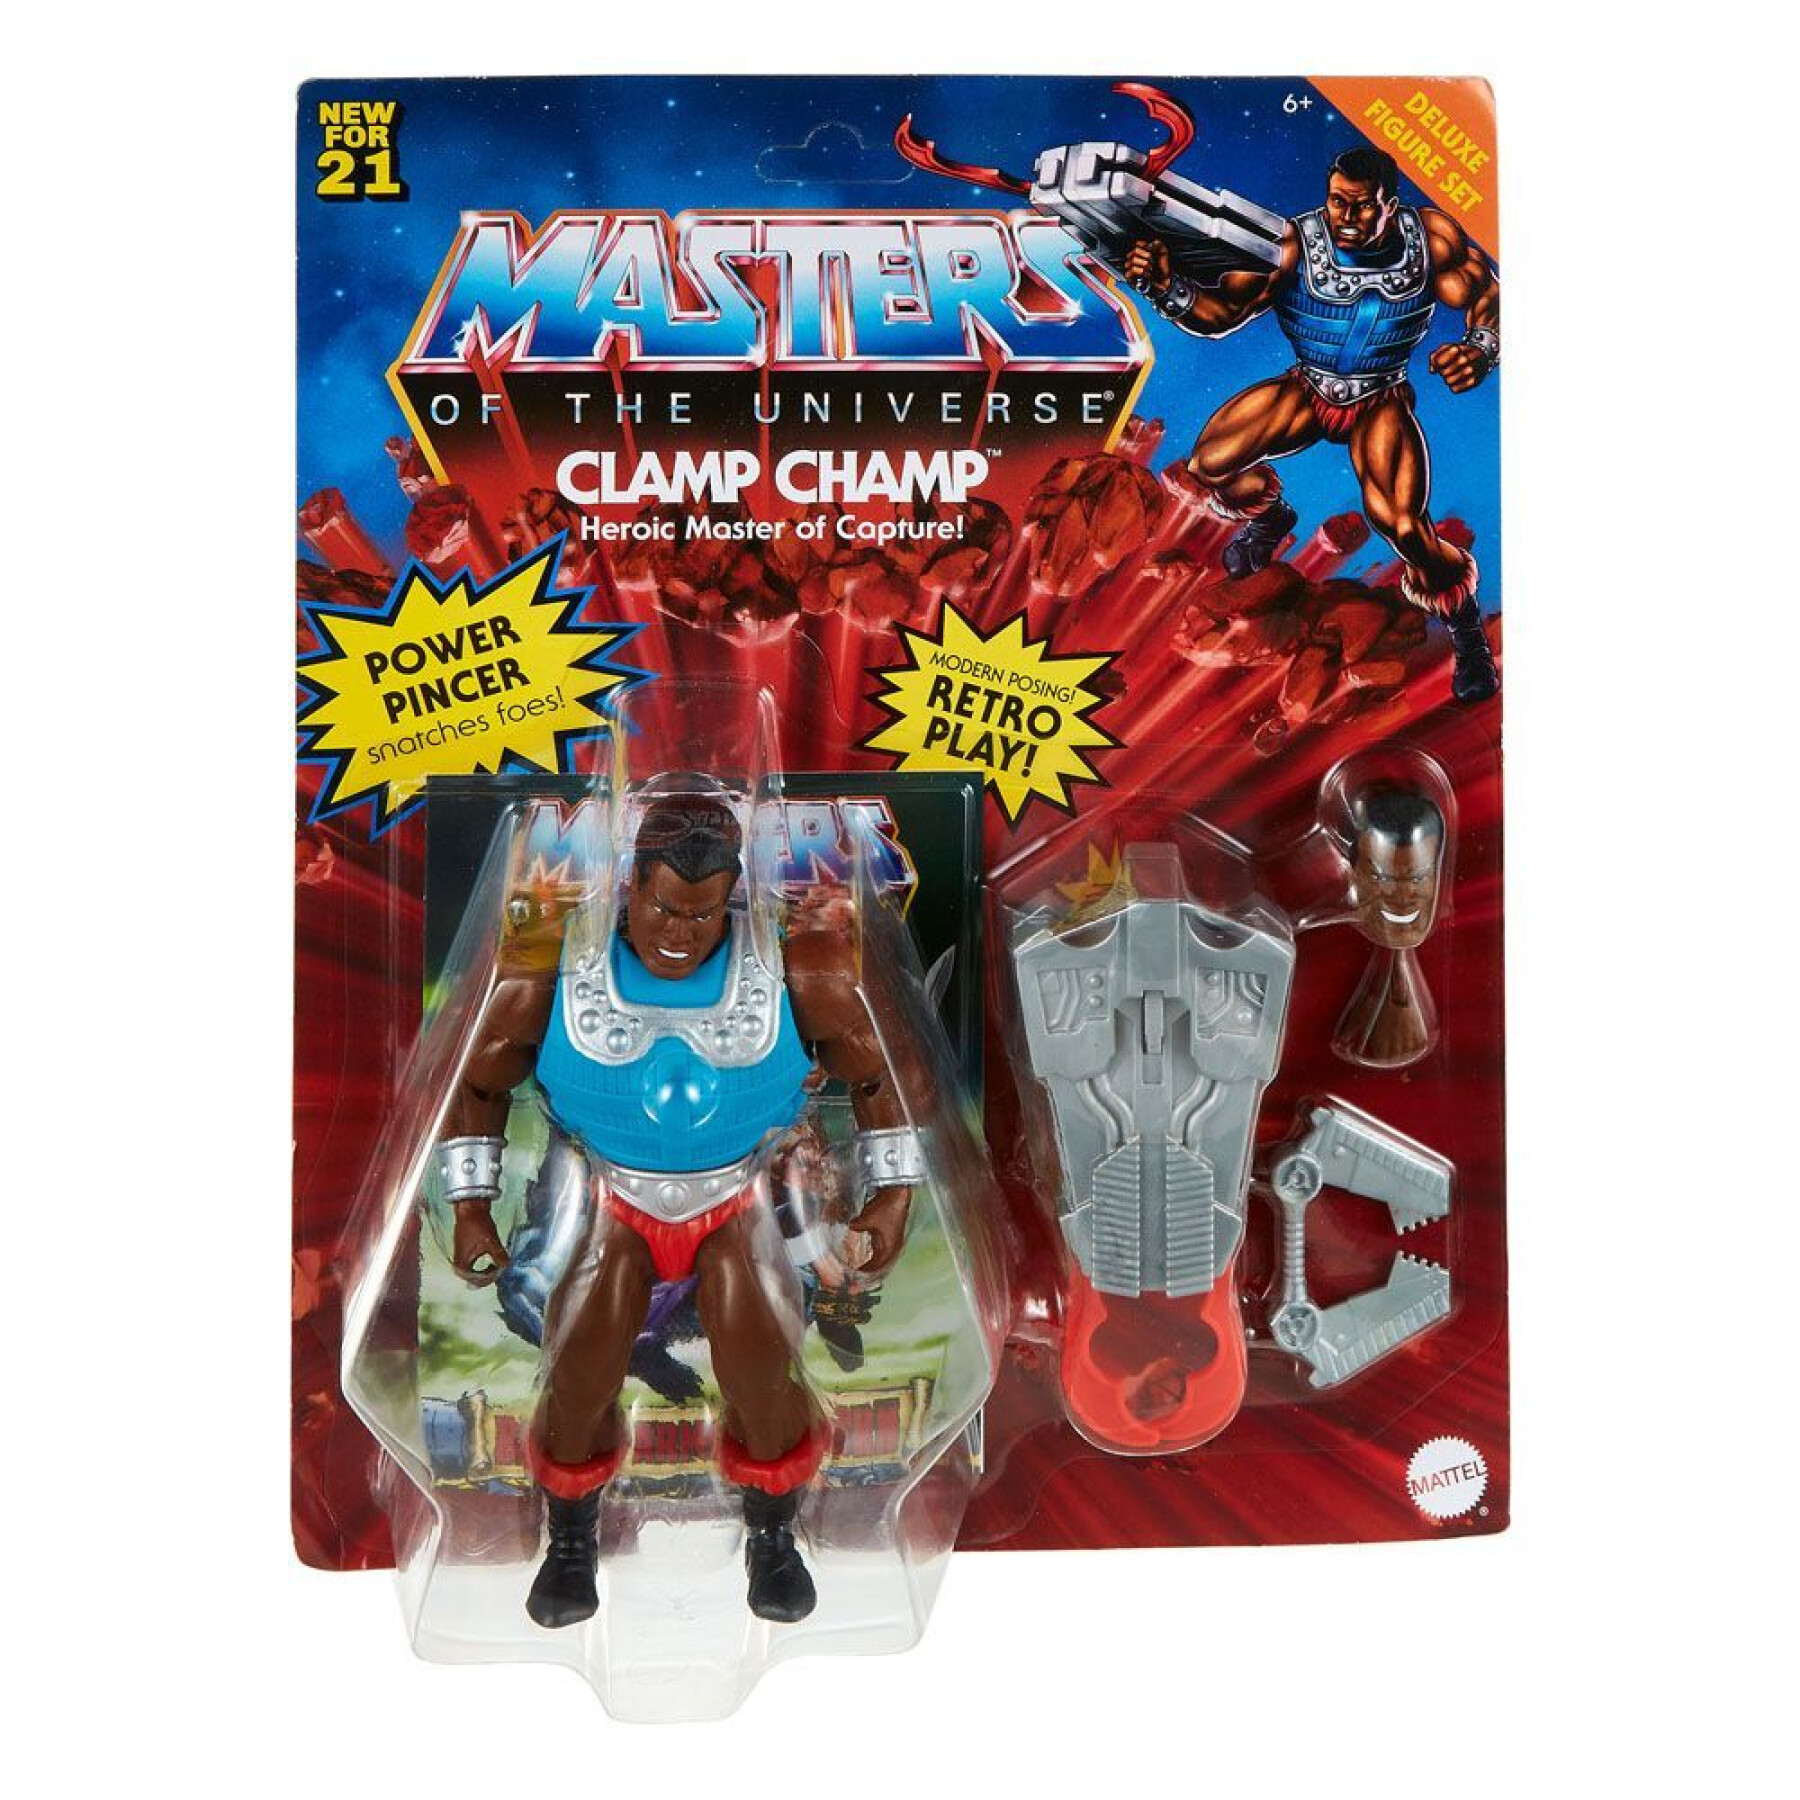 Figurina Mattel Masters Of The Universe Deluxe 2021 Clamp Champ